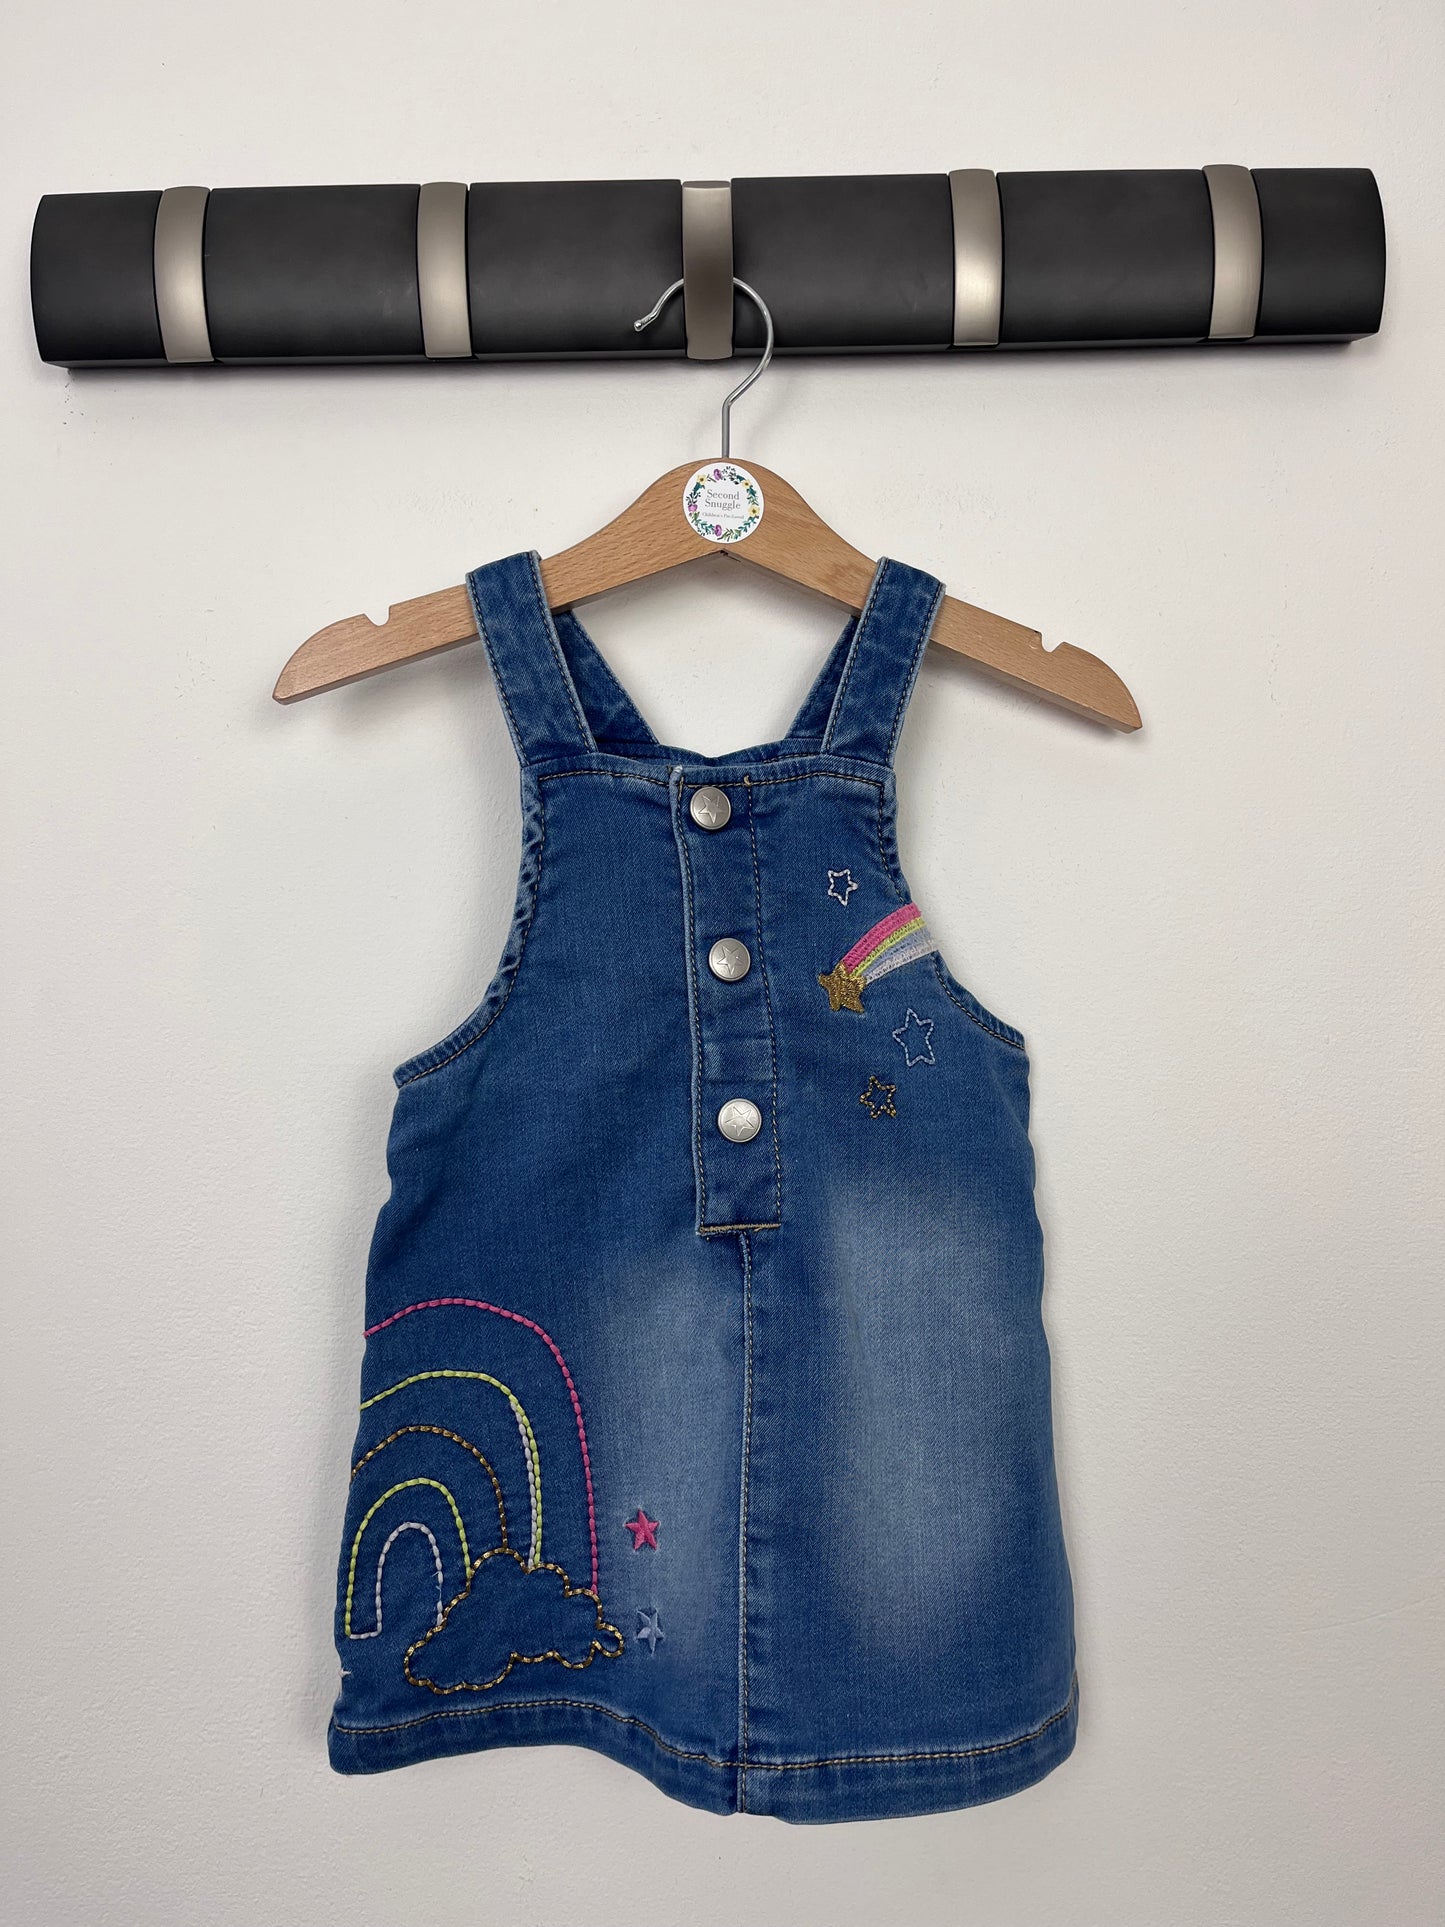 Blue Zoo 6-9 Months-Dresses-Second Snuggle Preloved